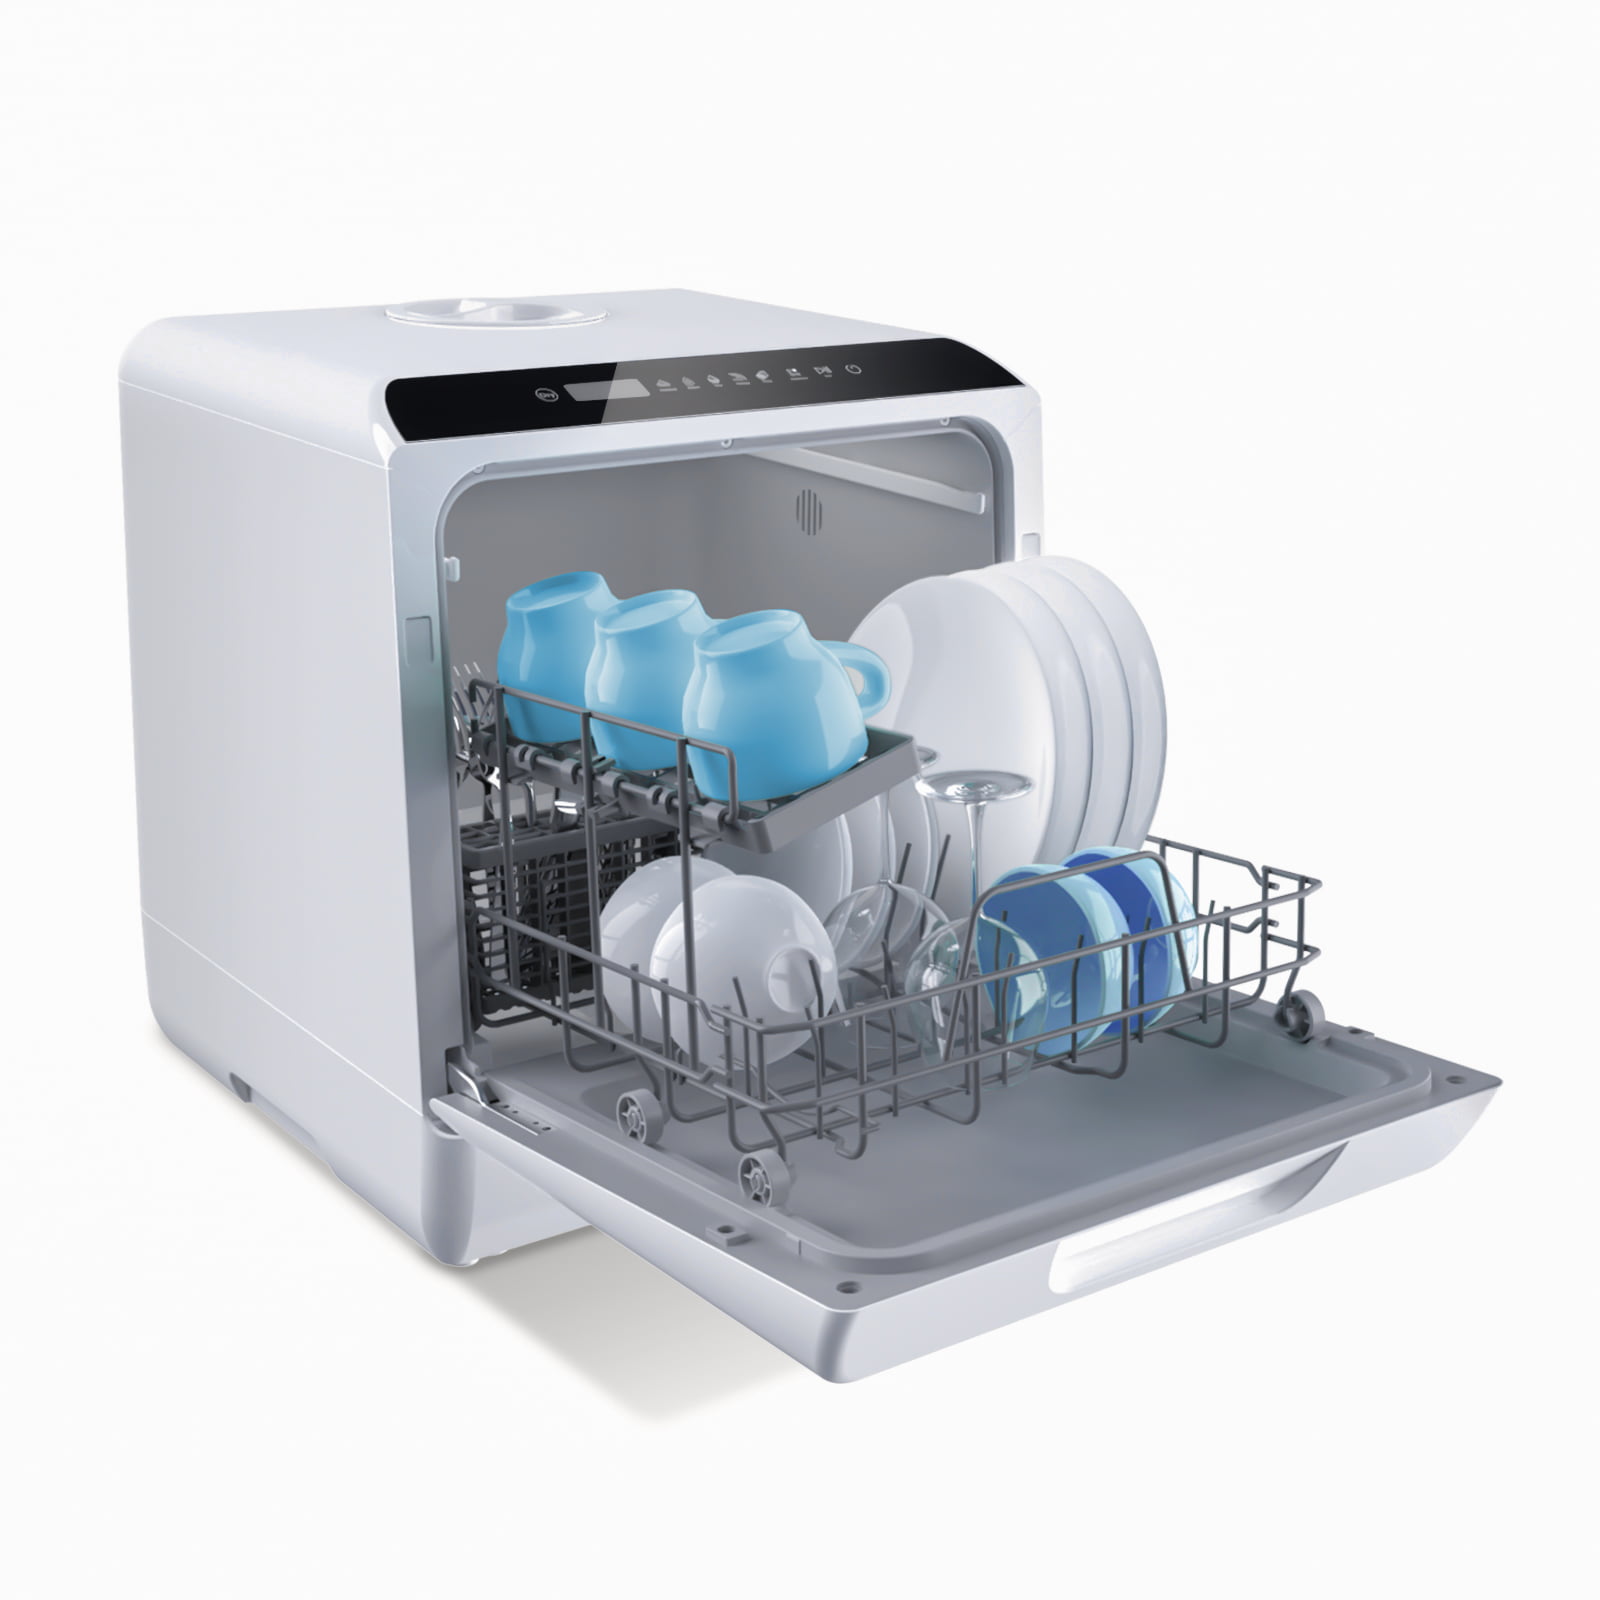 Portable Countertop Dishwasher, 5 Washing Programs Mini Dishwasher with 5L  Built-in Water Tank & Inlet Hose, Baby Care & Fruit Wash for Small